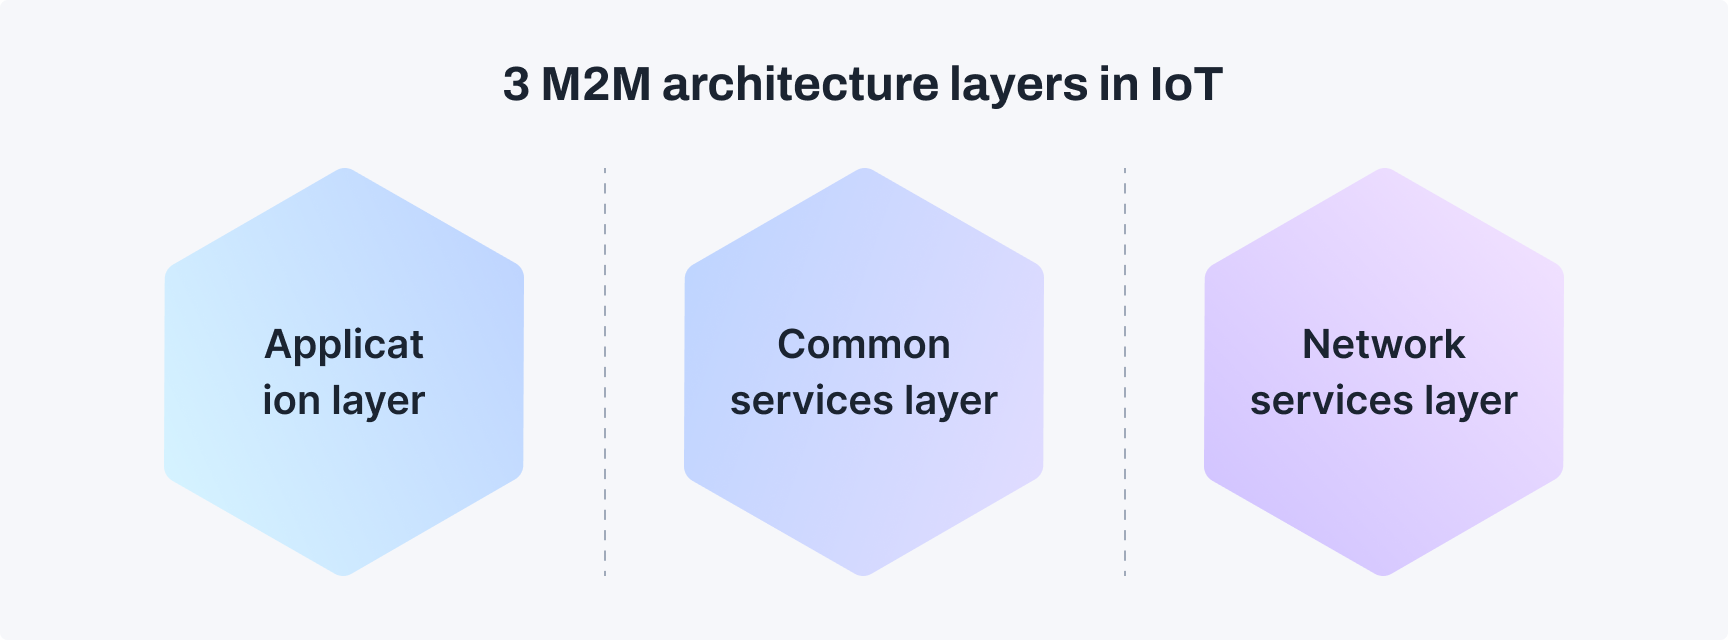 M2M architecture layers in IoT